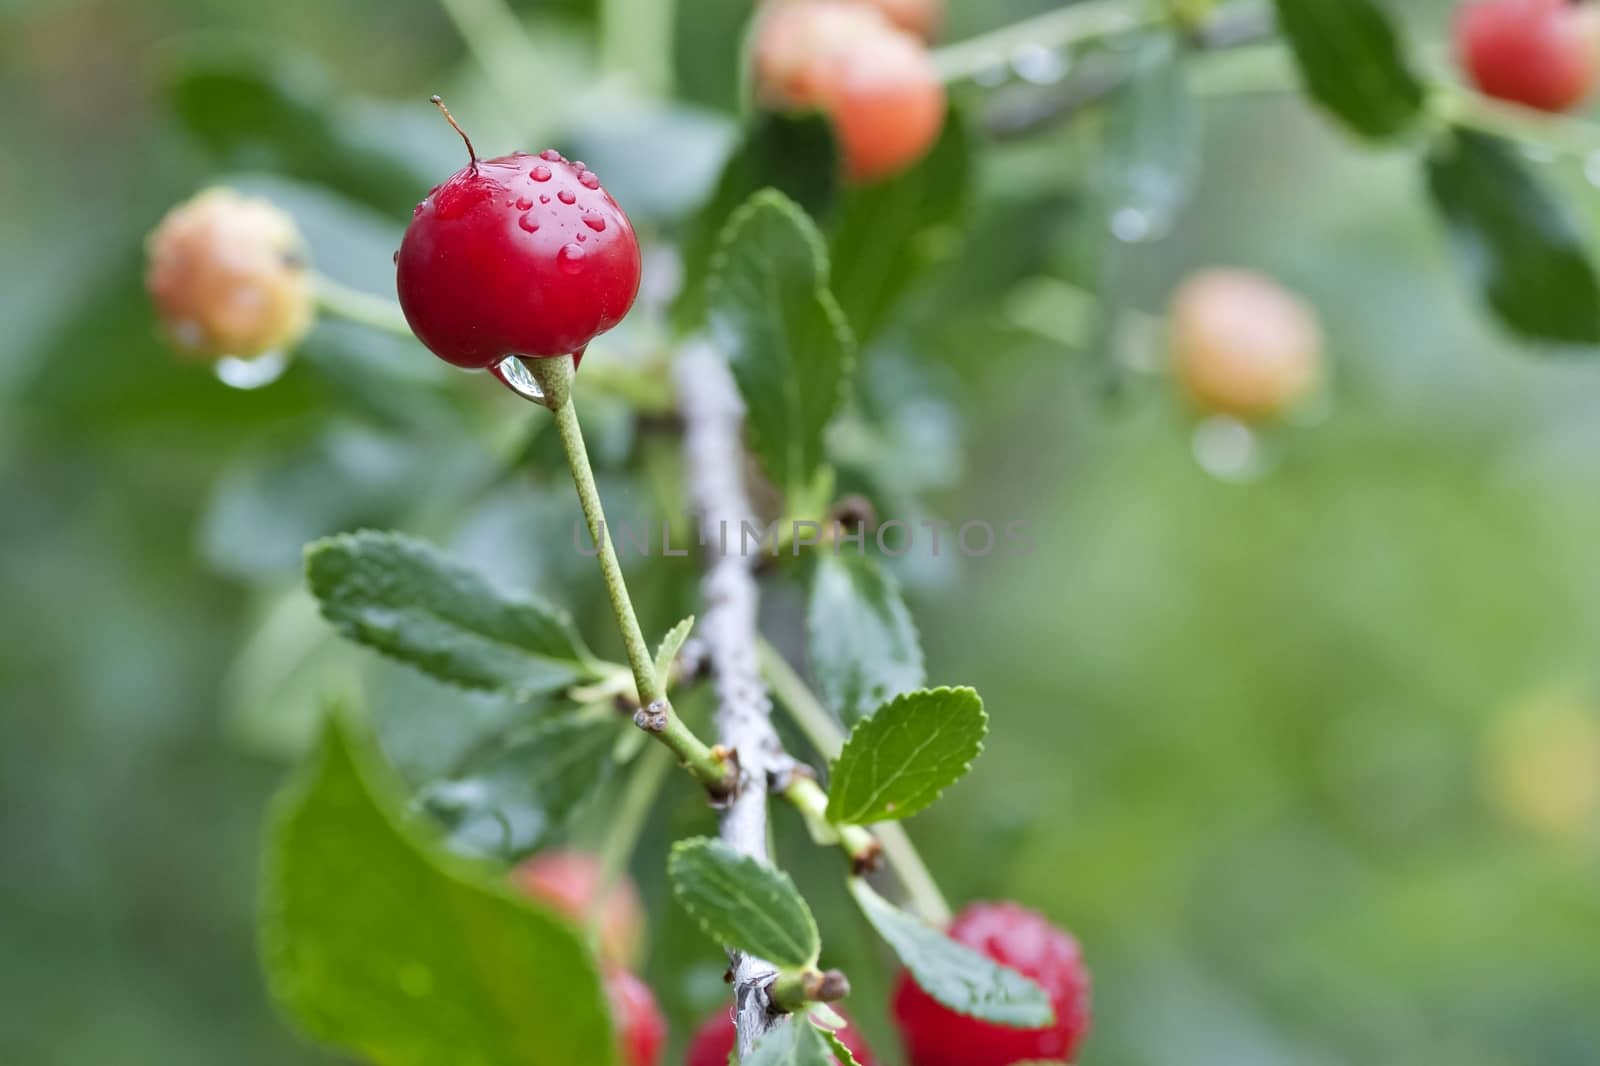 cherry with rain drops on the branches on blurred nature background